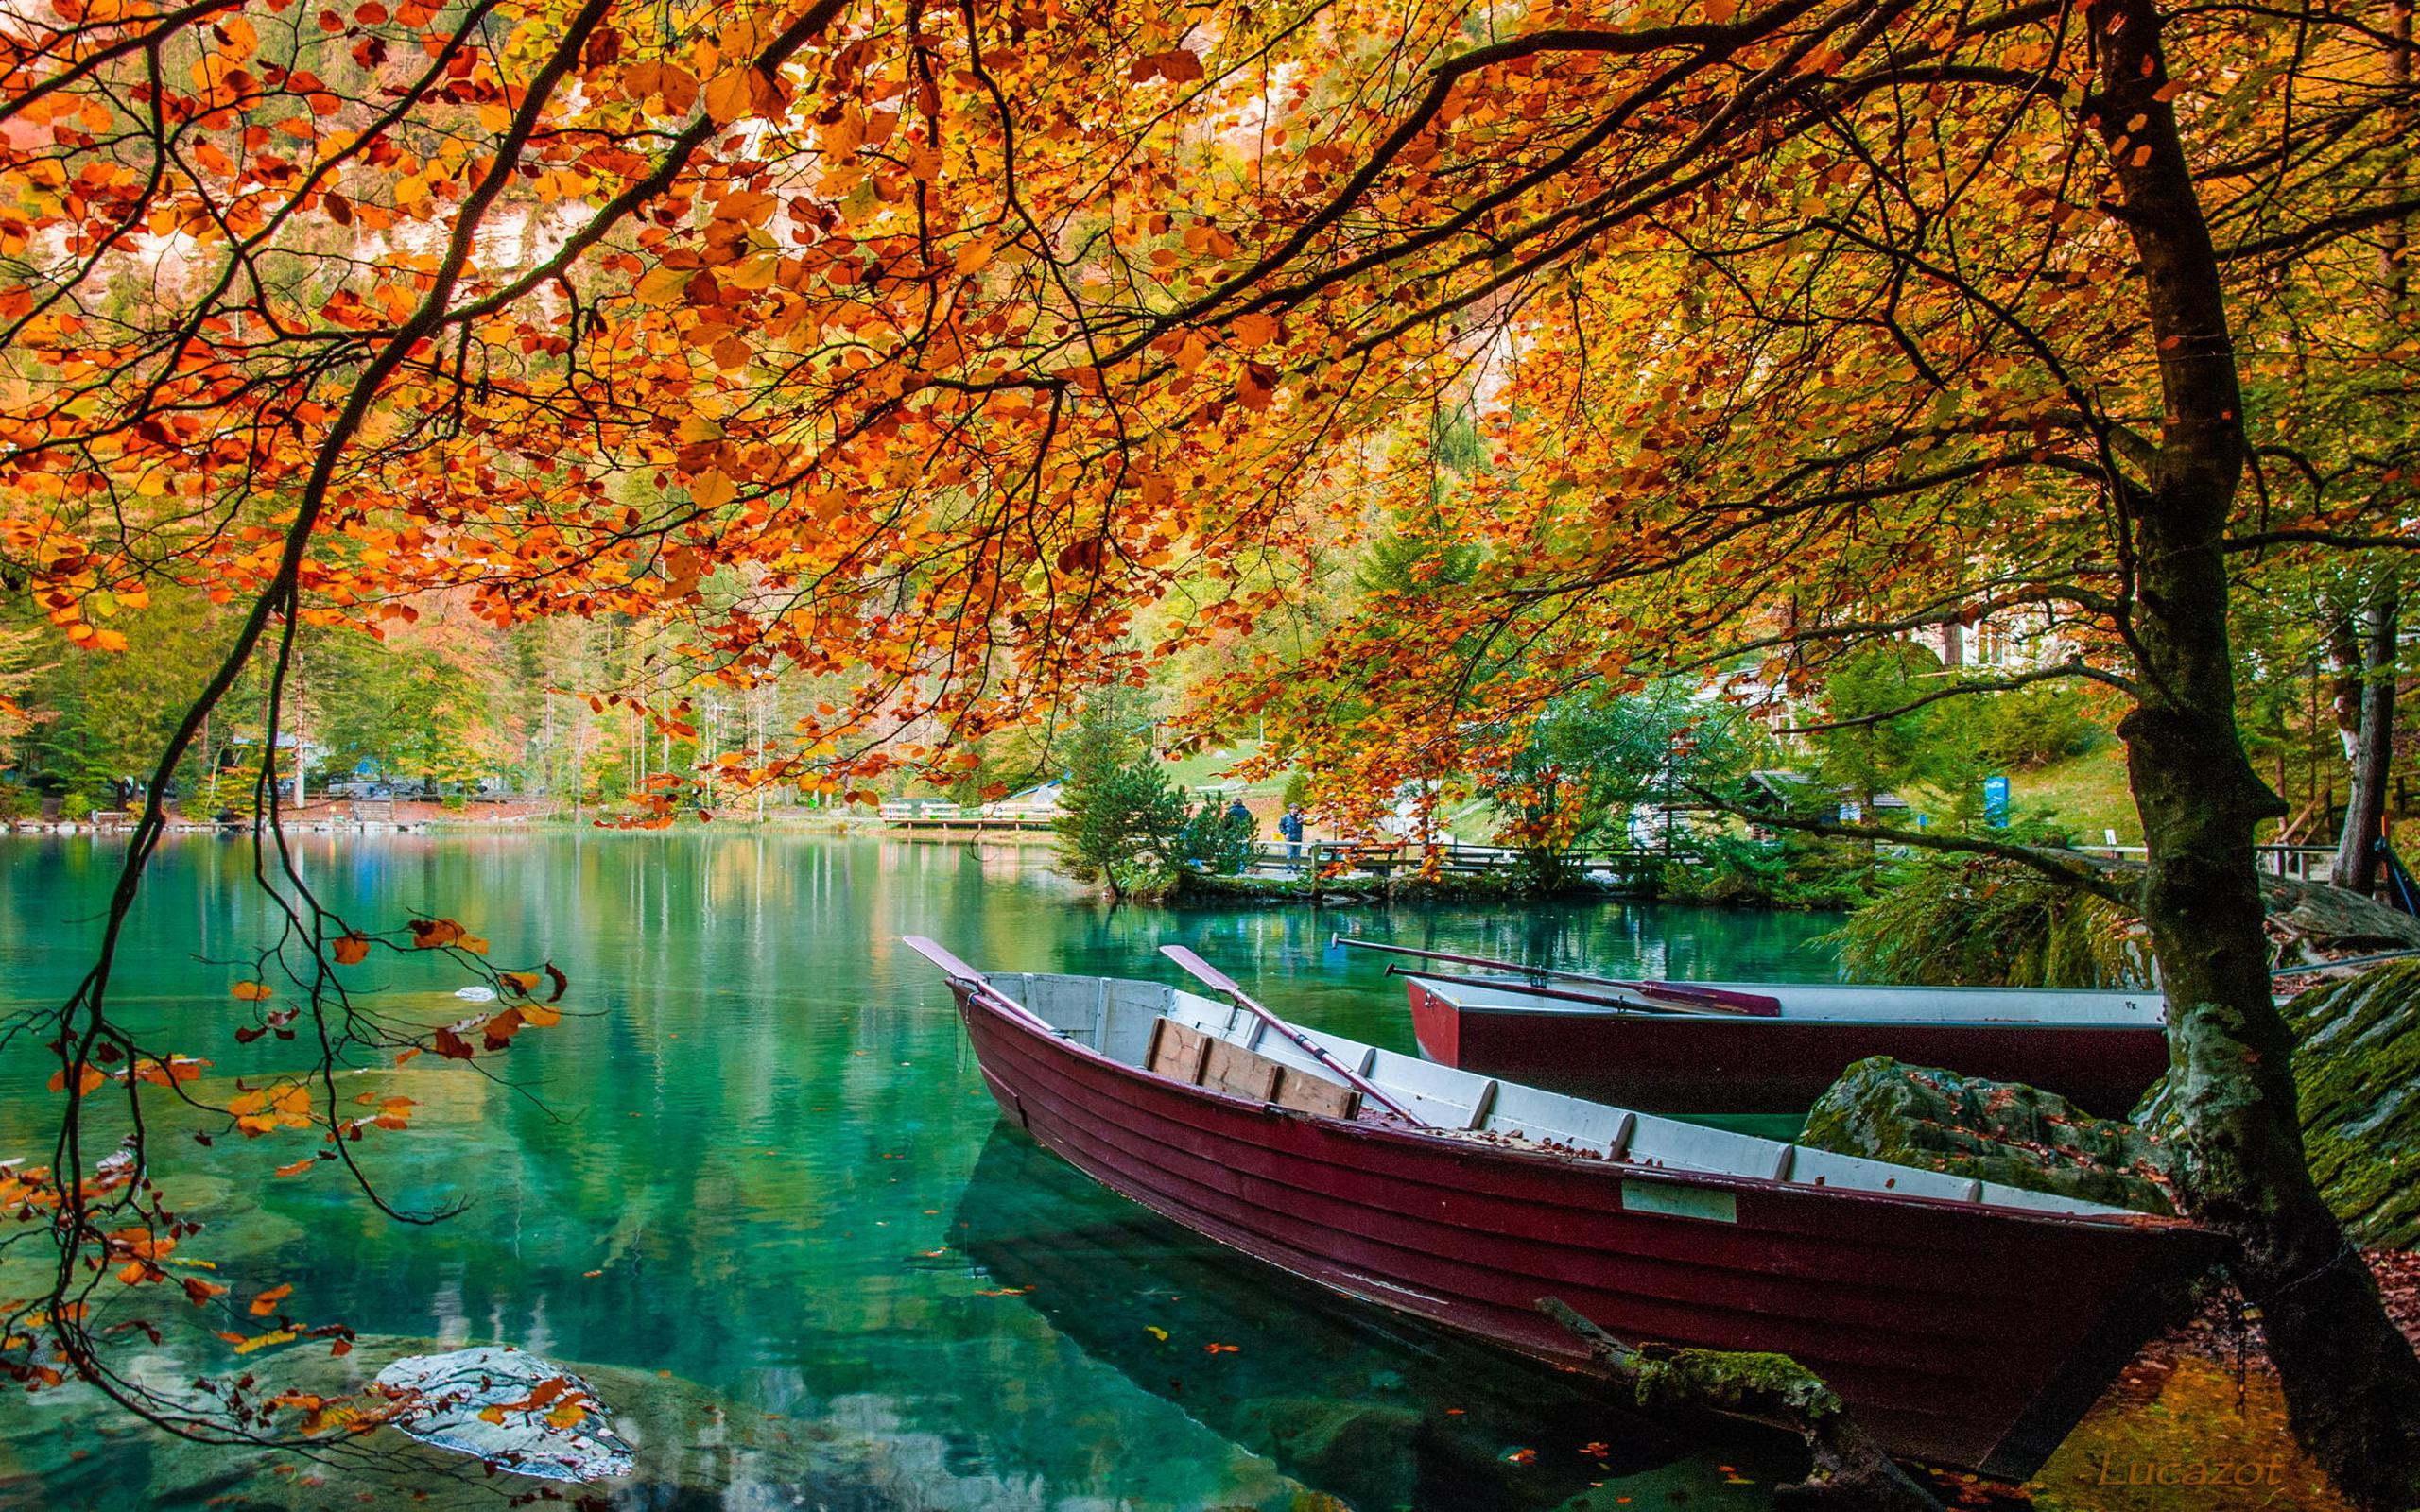 Autumn Boats Wallpapers Wallpaper Cave